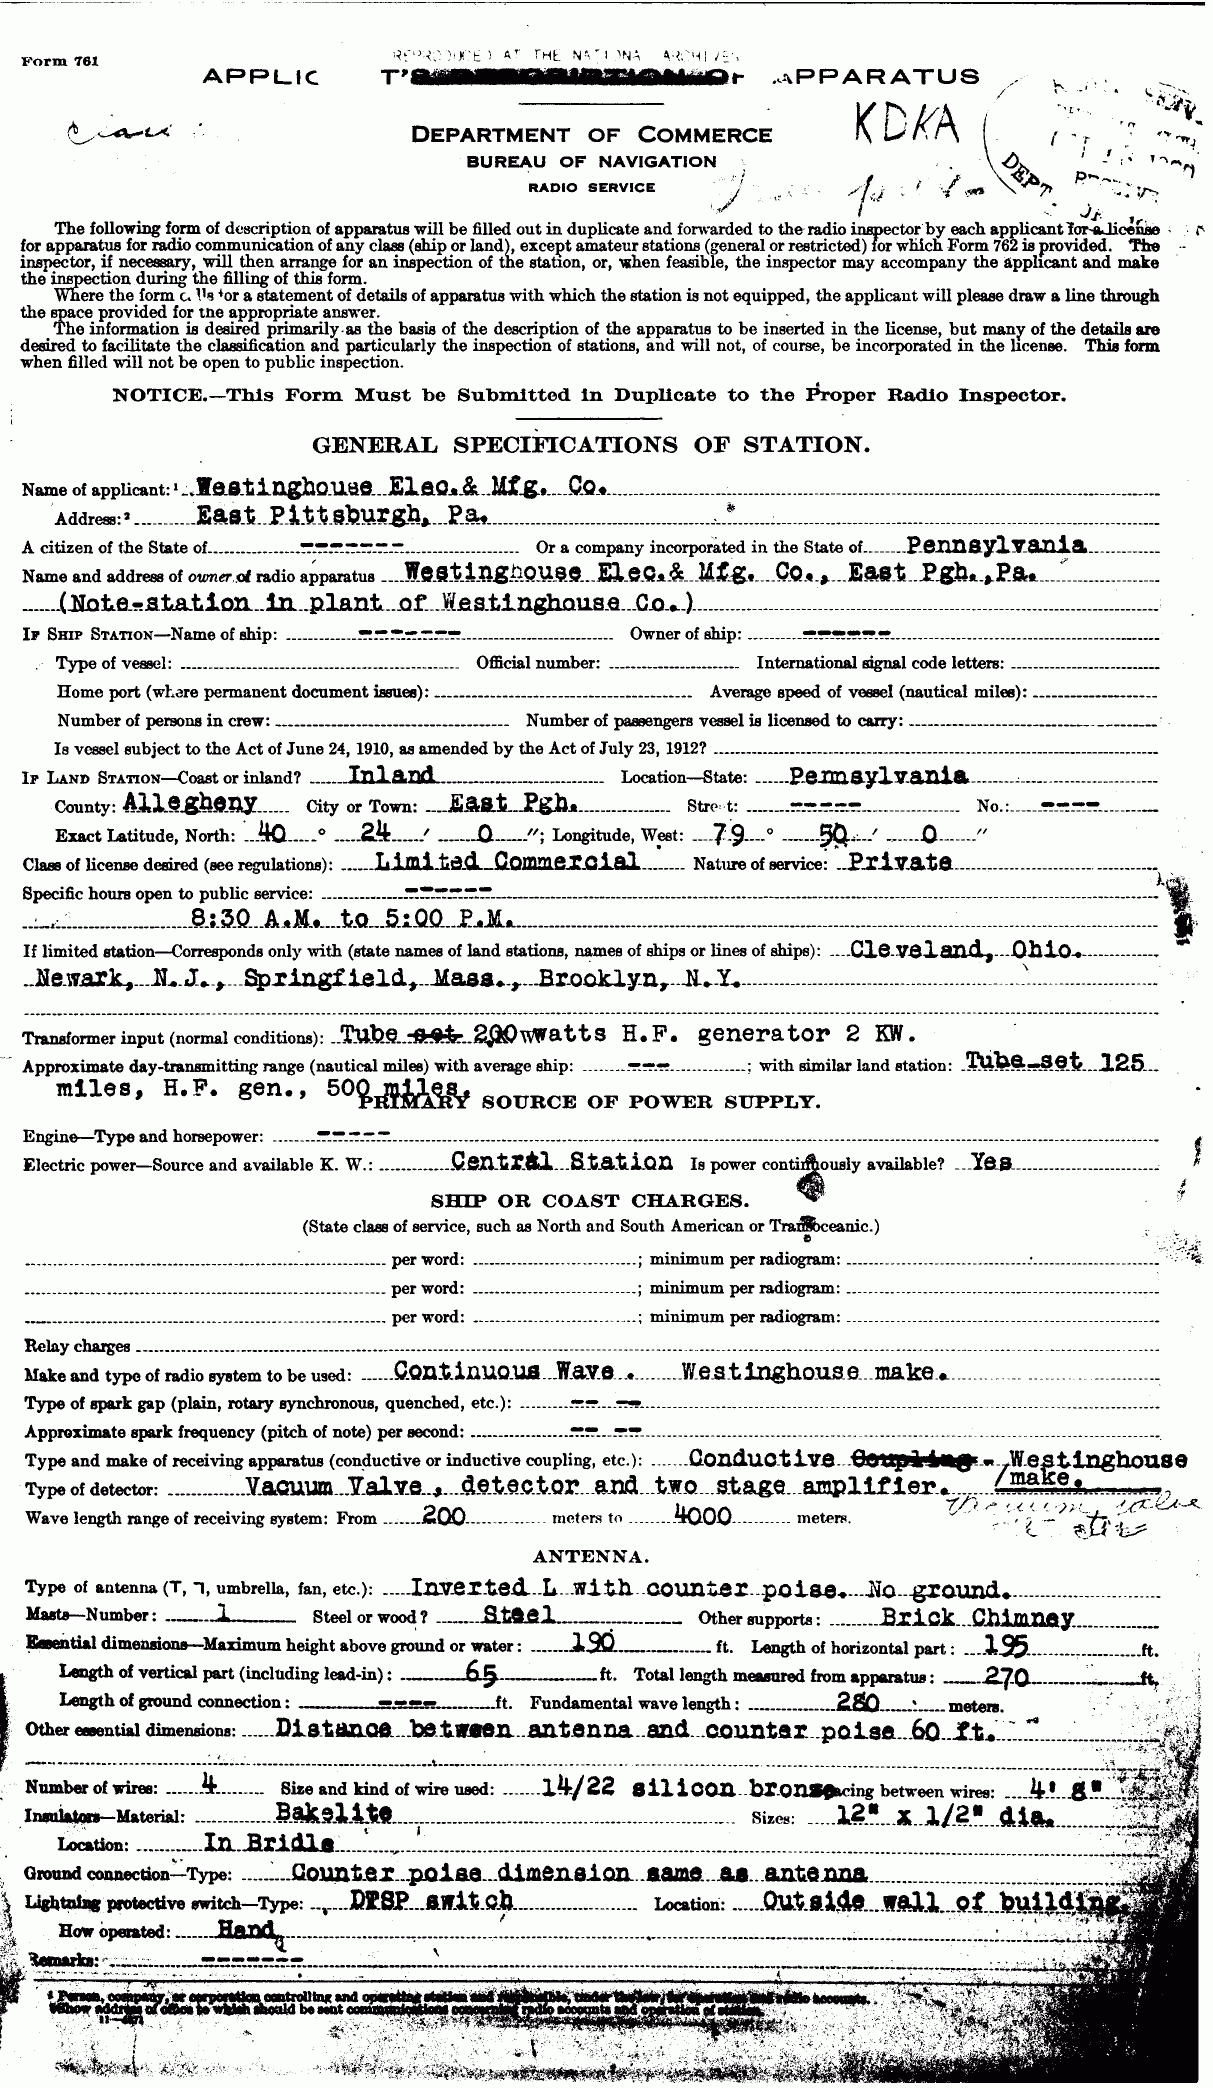 Form 761 for KDKA first licence - 1st page